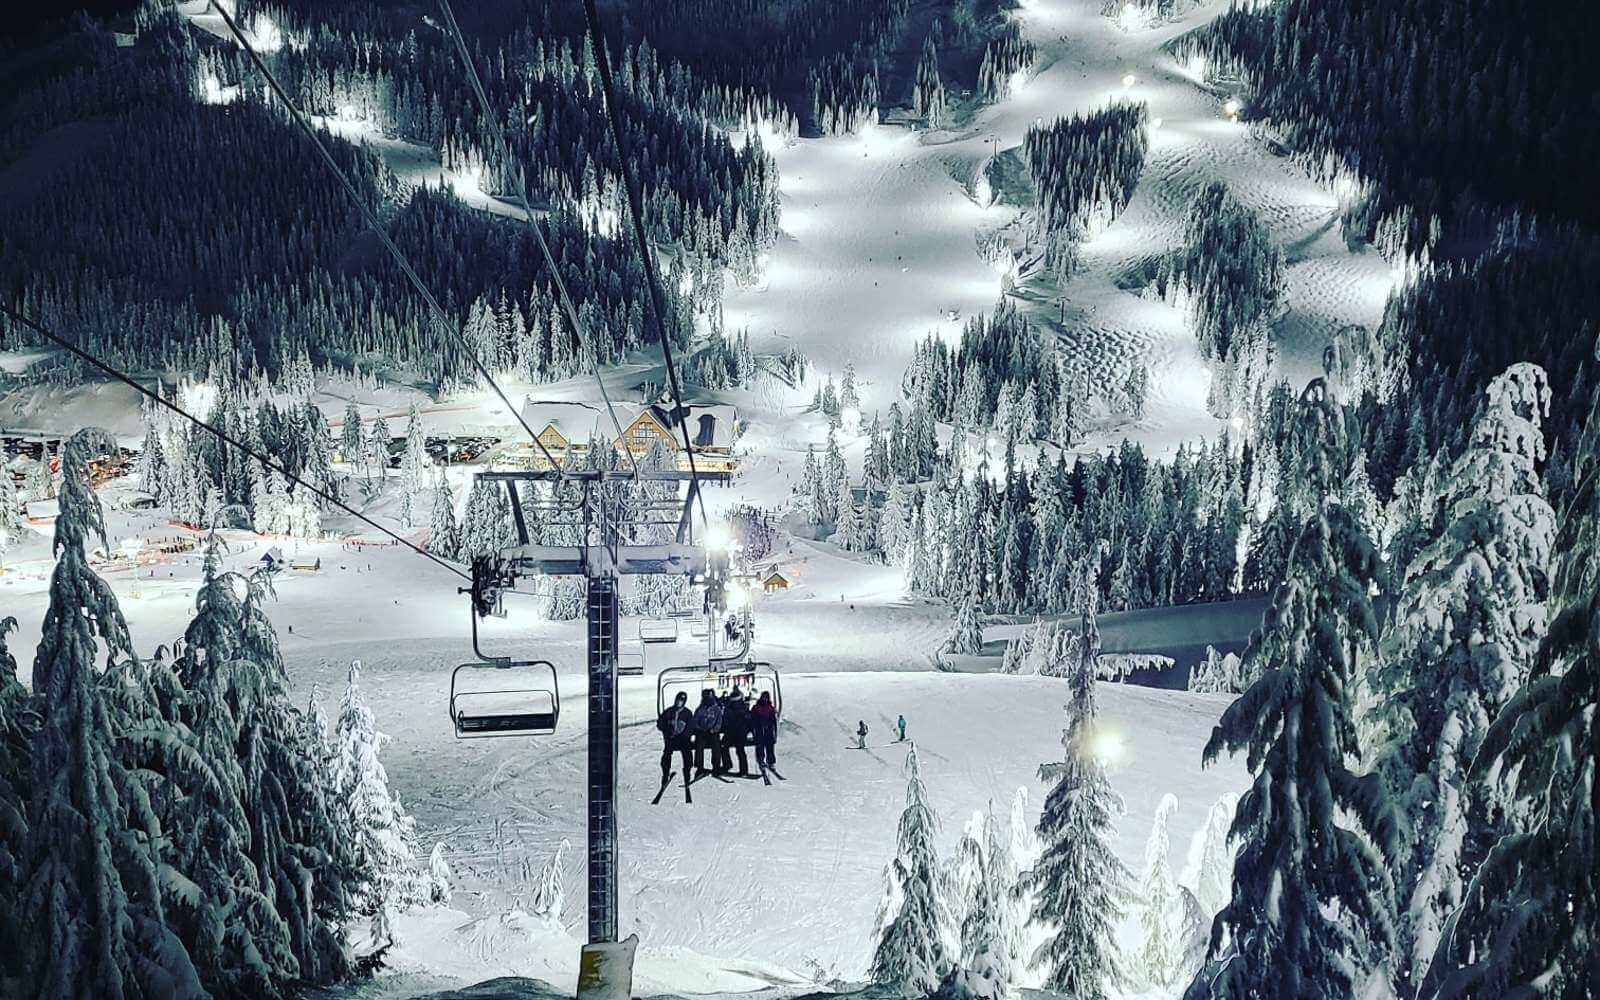 night skiers on a chairlift at cypress mountain ski ill